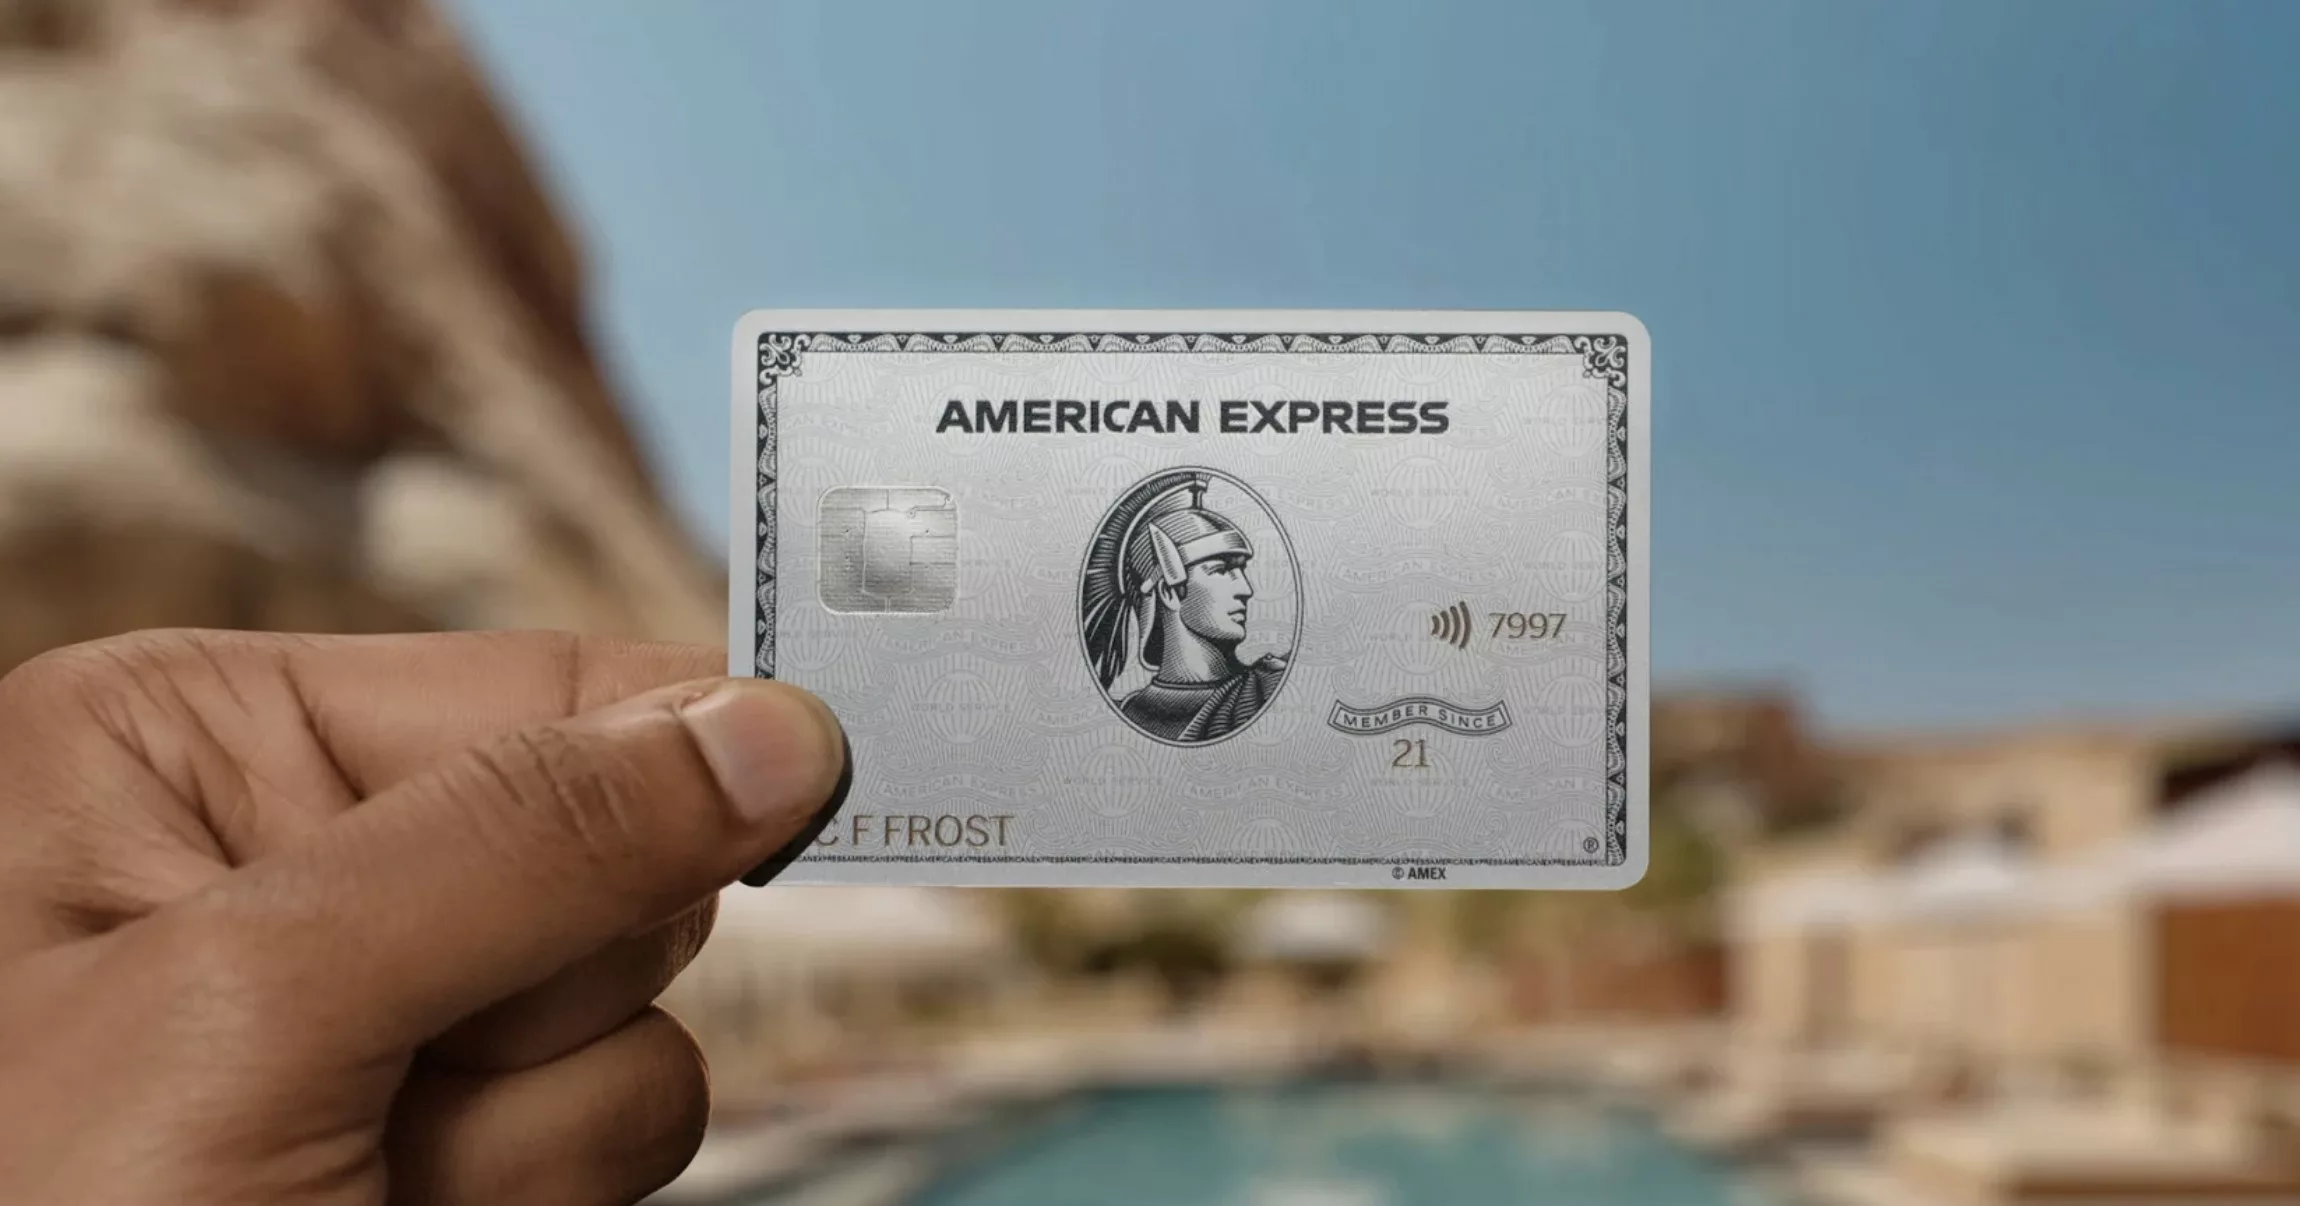 travel hacking with american express